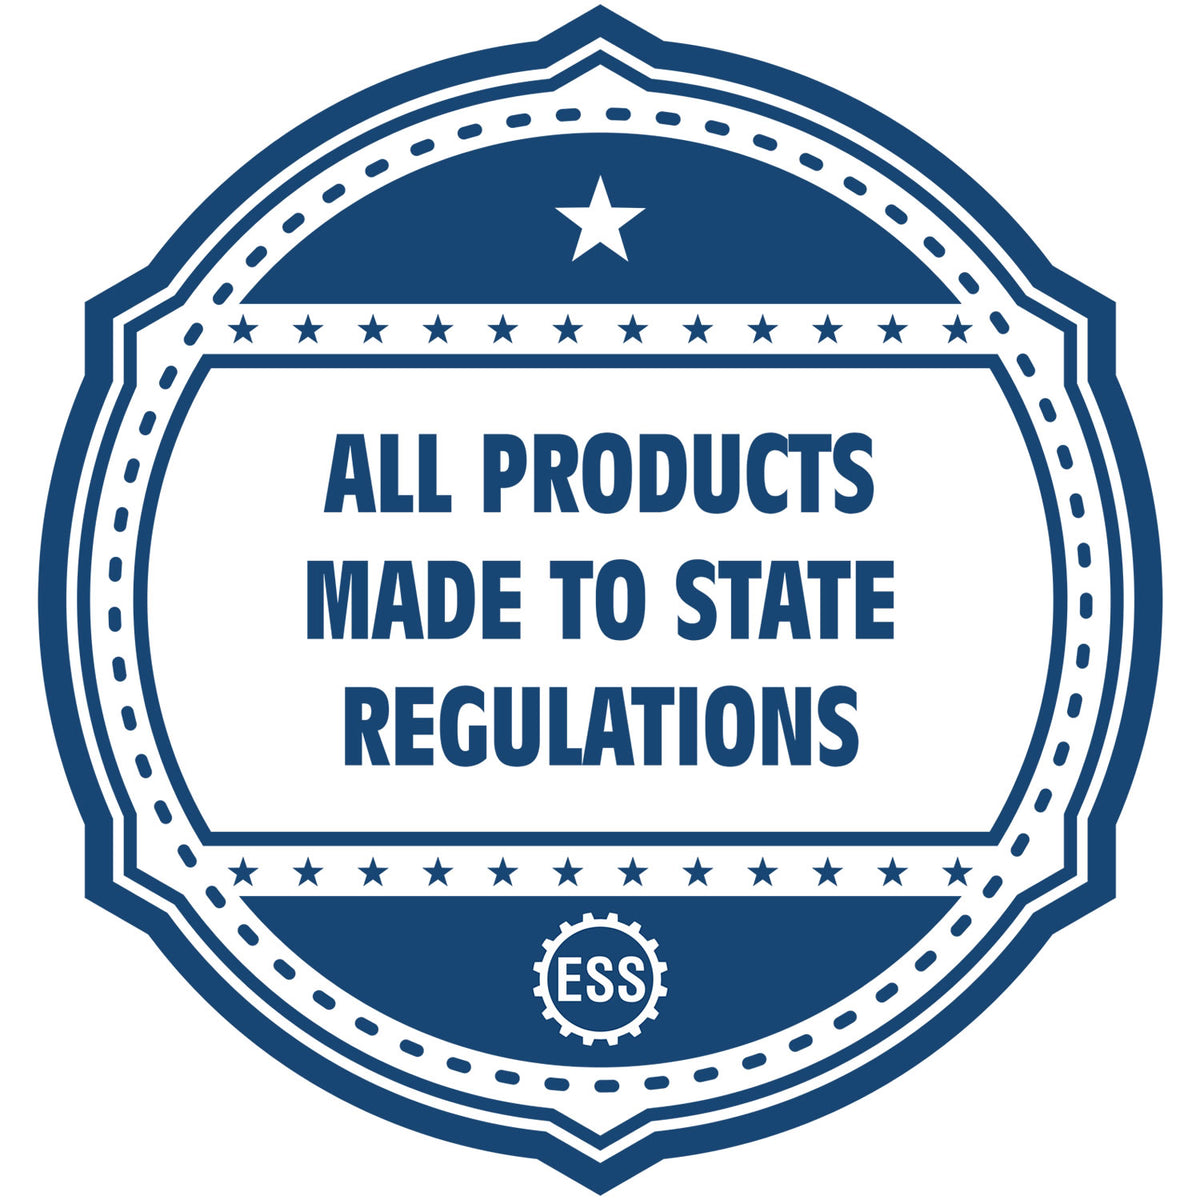 An icon or badge element for the Soft Connecticut Professional Engineer Seal showing that this product is made in compliance with state regulations.